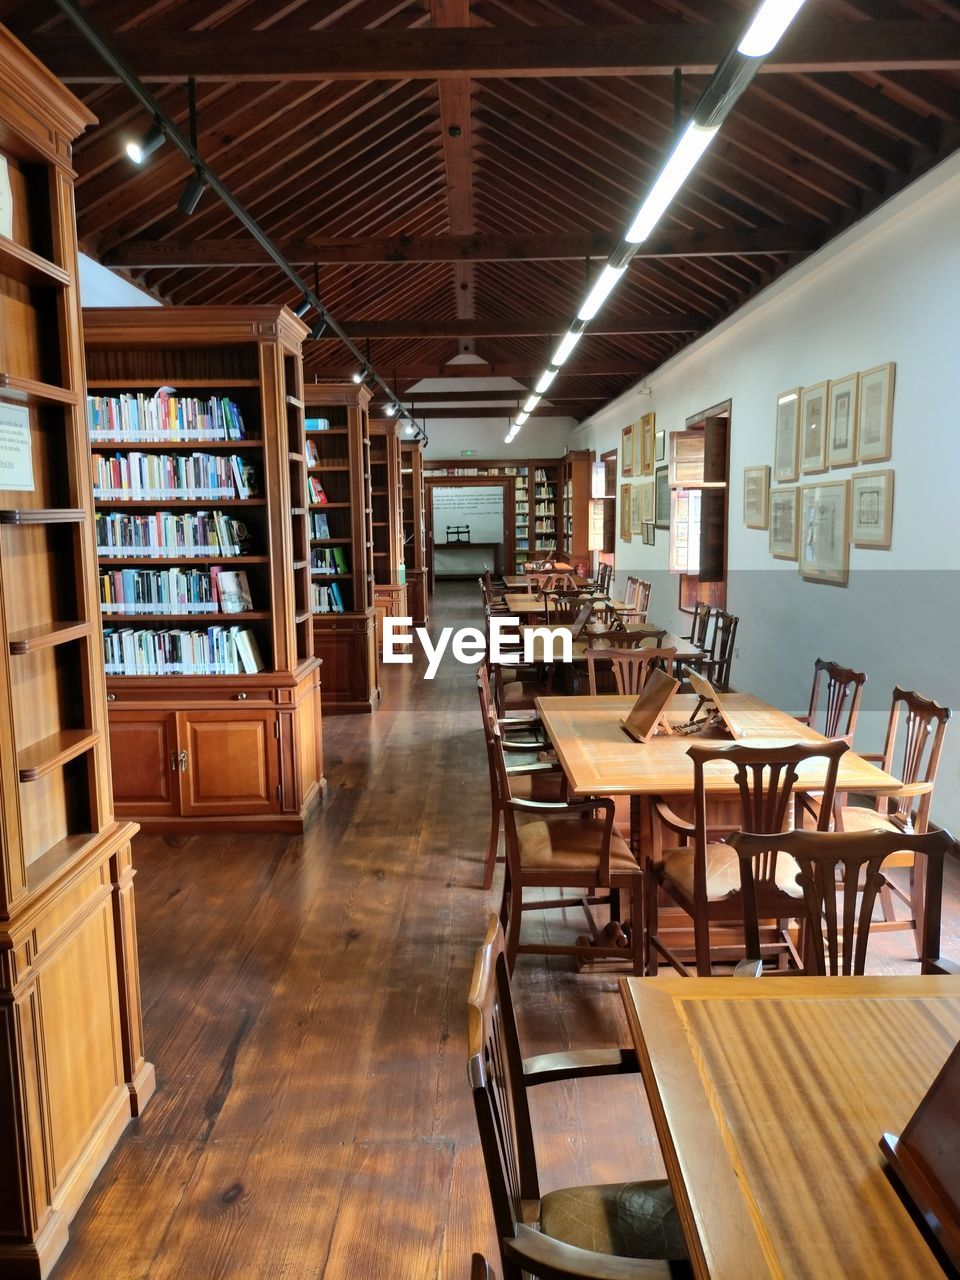 indoors, seat, wood, table, room, chair, library, shelf, interior design, architecture, flooring, bookshelf, furniture, hardwood floor, no people, business, book, bookcase, domestic room, education, absence, food and drink, publication, home interior, building